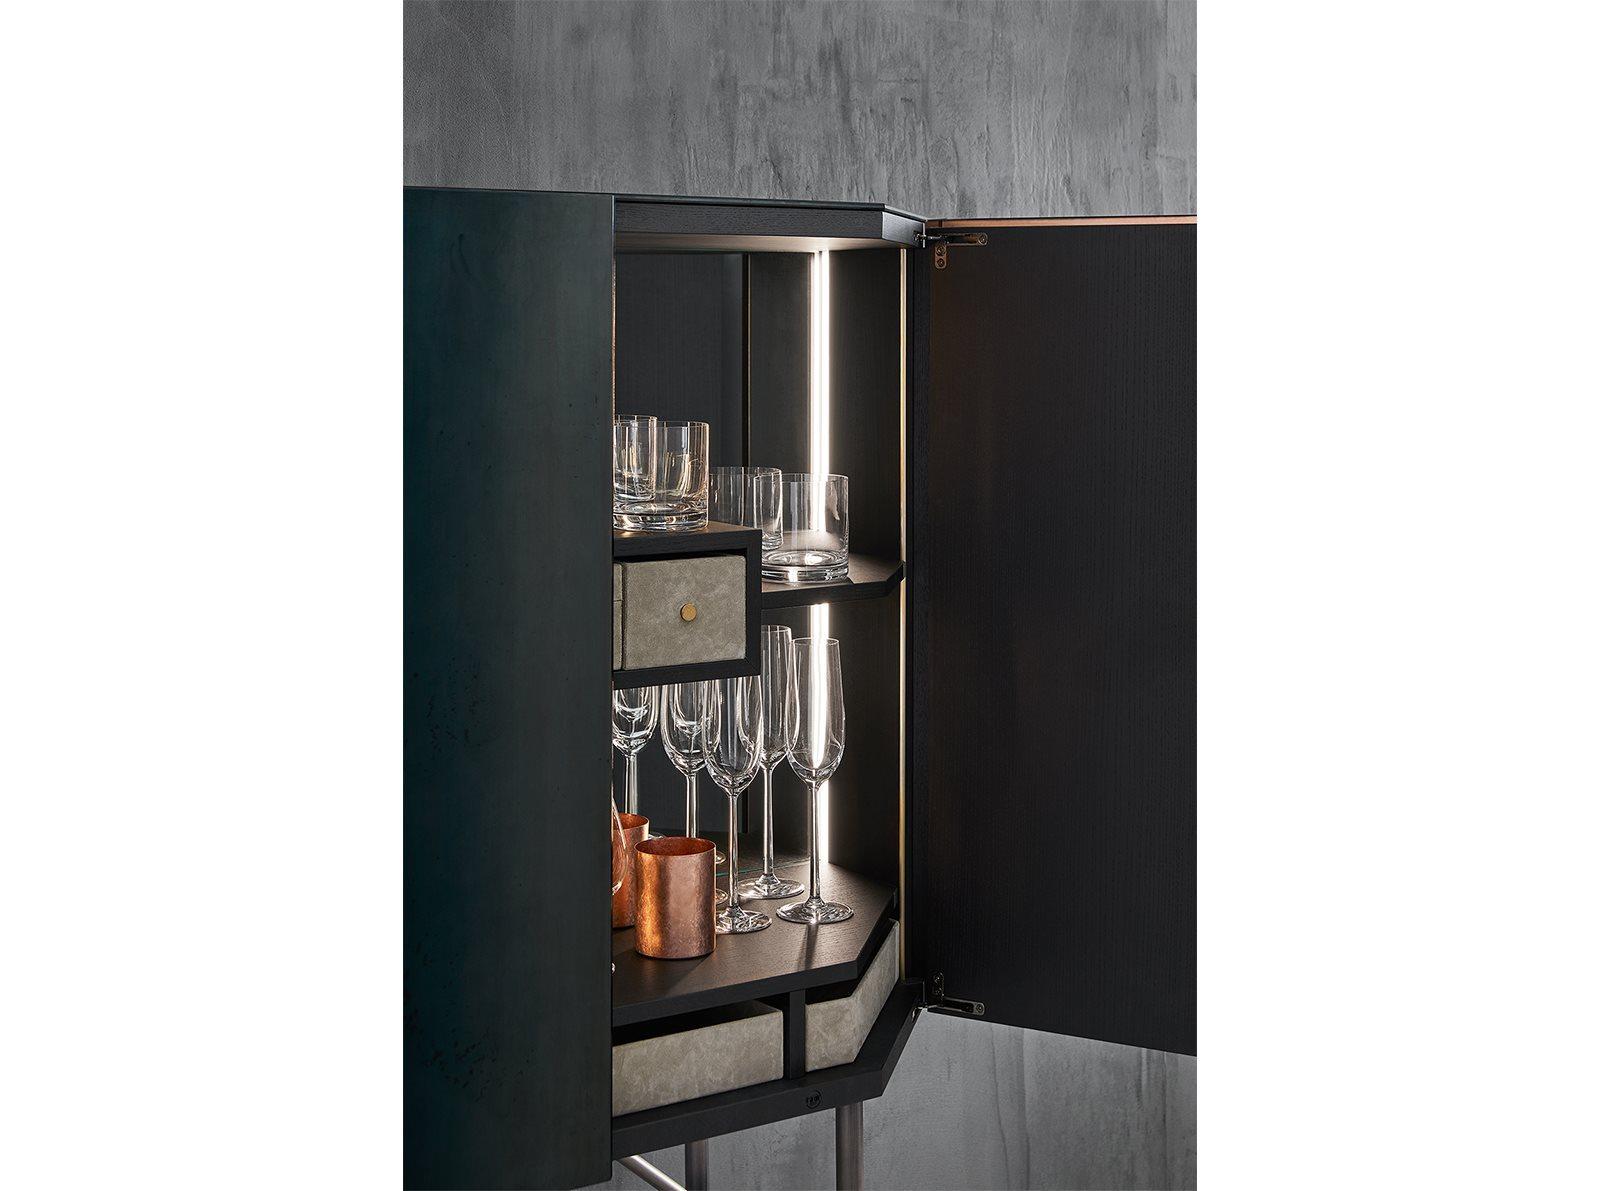 Misty Venice numbered edition bar cabinet in glass by Gallotti & Radice.

Black open pore lacquered ash wooden bar unit covered by 6mm tempered glass decorated by hand with an exclusive treatment. Patinated bronze lacquered base. 

Supplied with